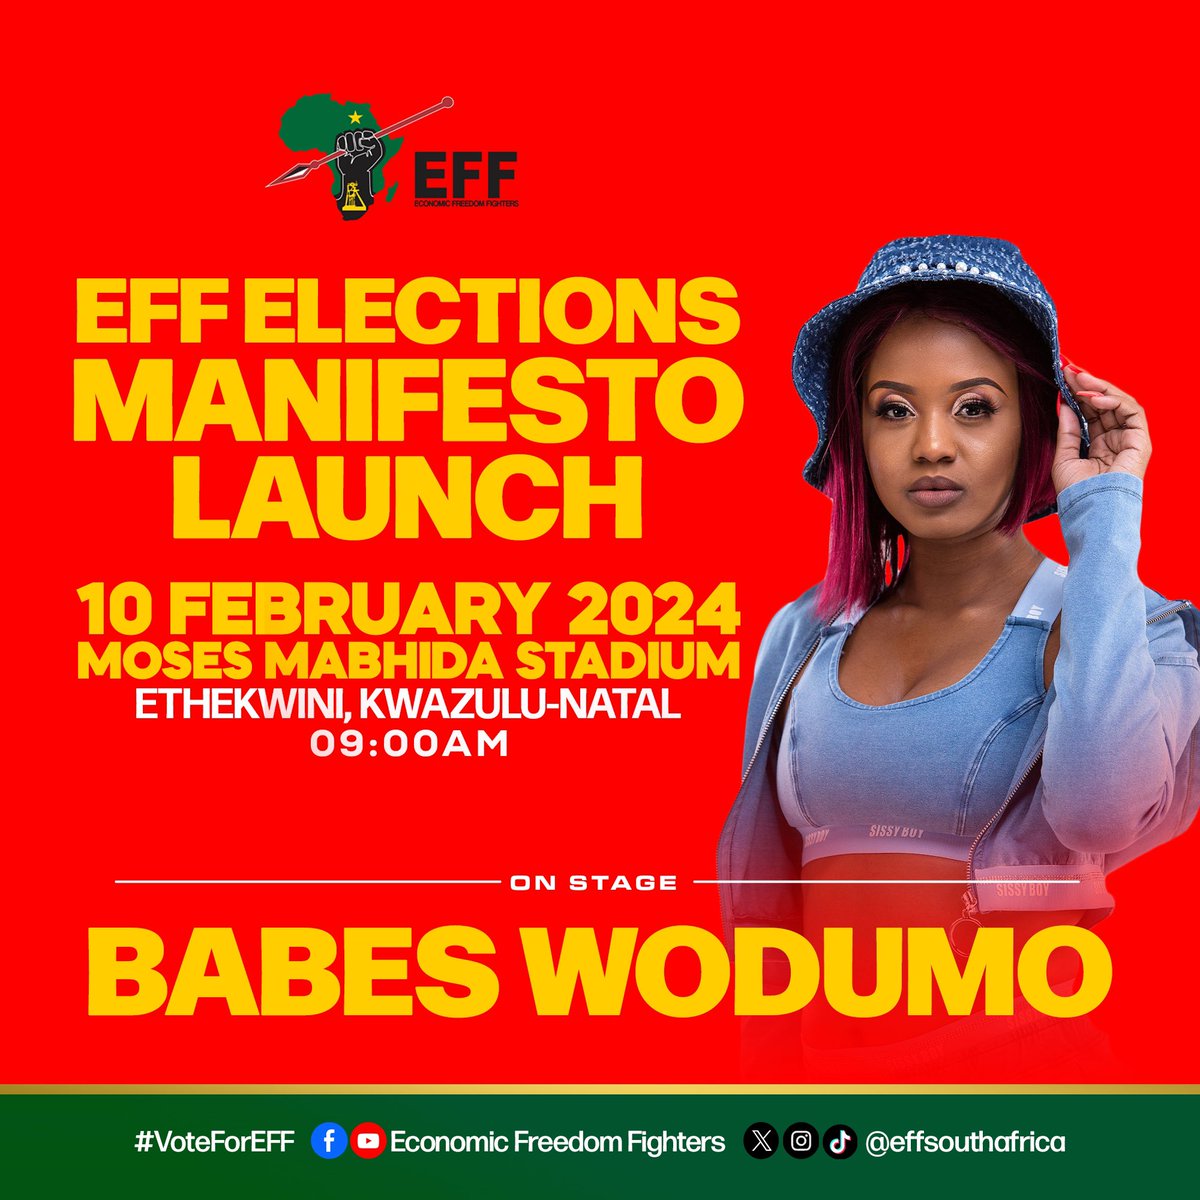 Babes Wodumo'S Stage Comeback At Eff Manifesto: A Spotlight On Resilience And Renewal 1